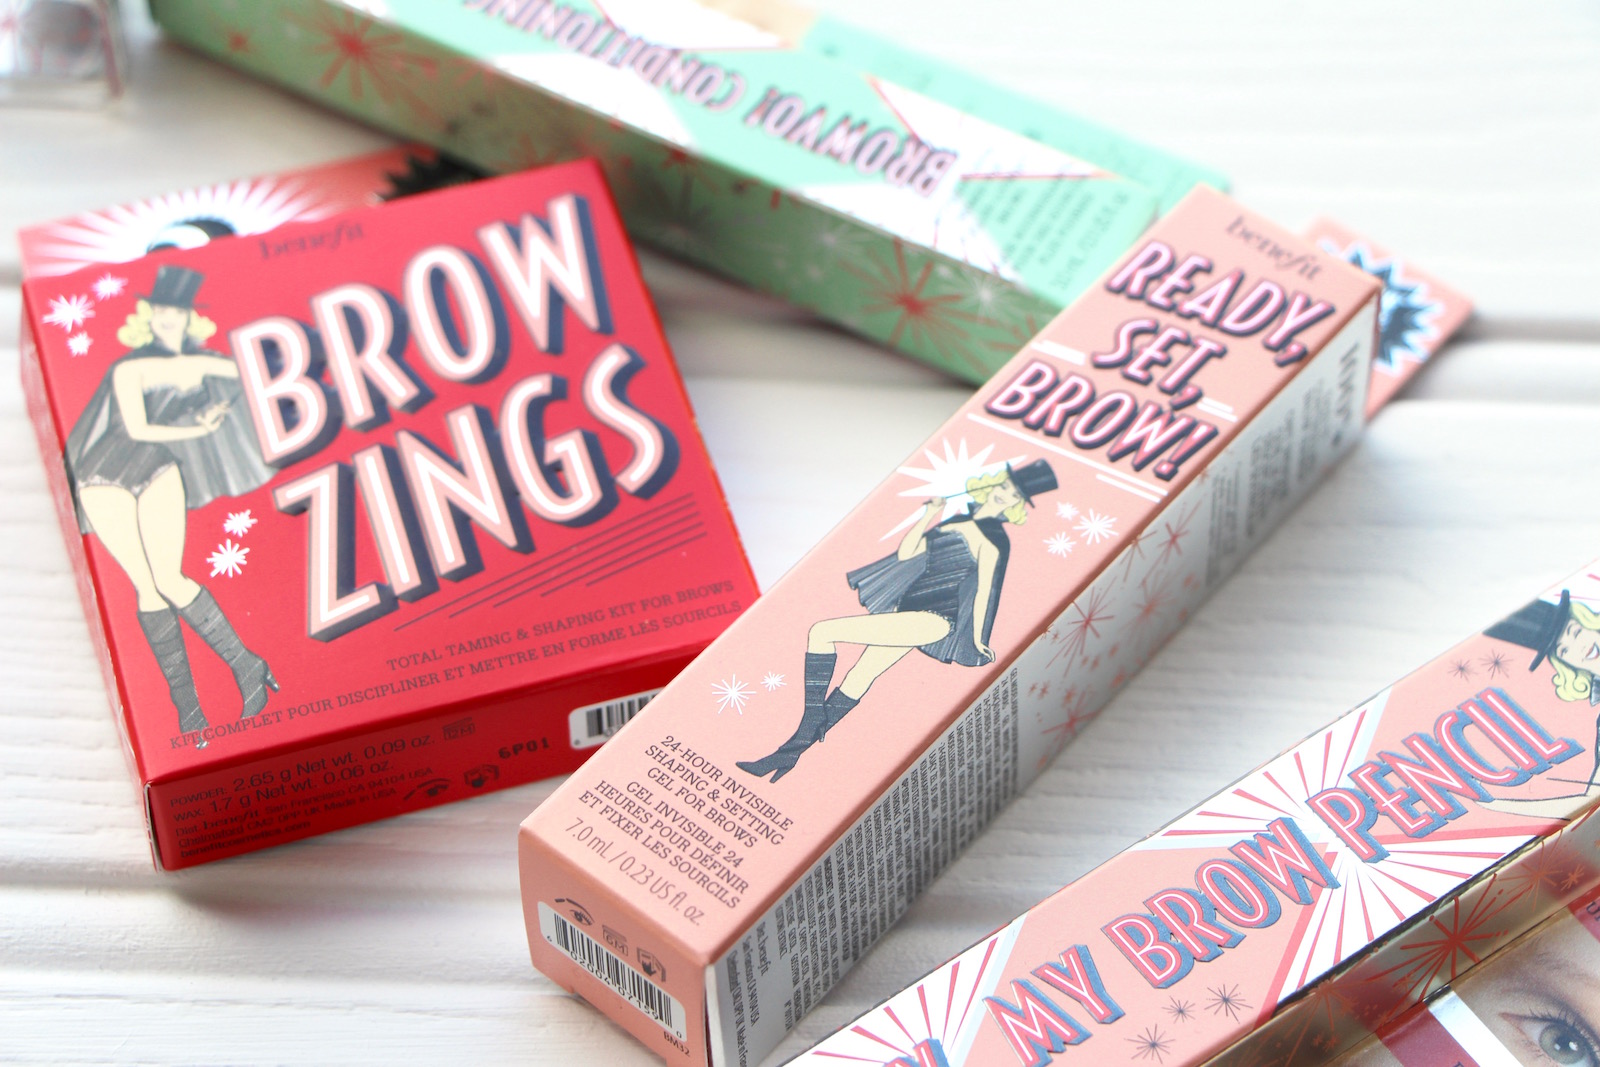 Benefit Brows: An Incredible Instagram Giveaway!